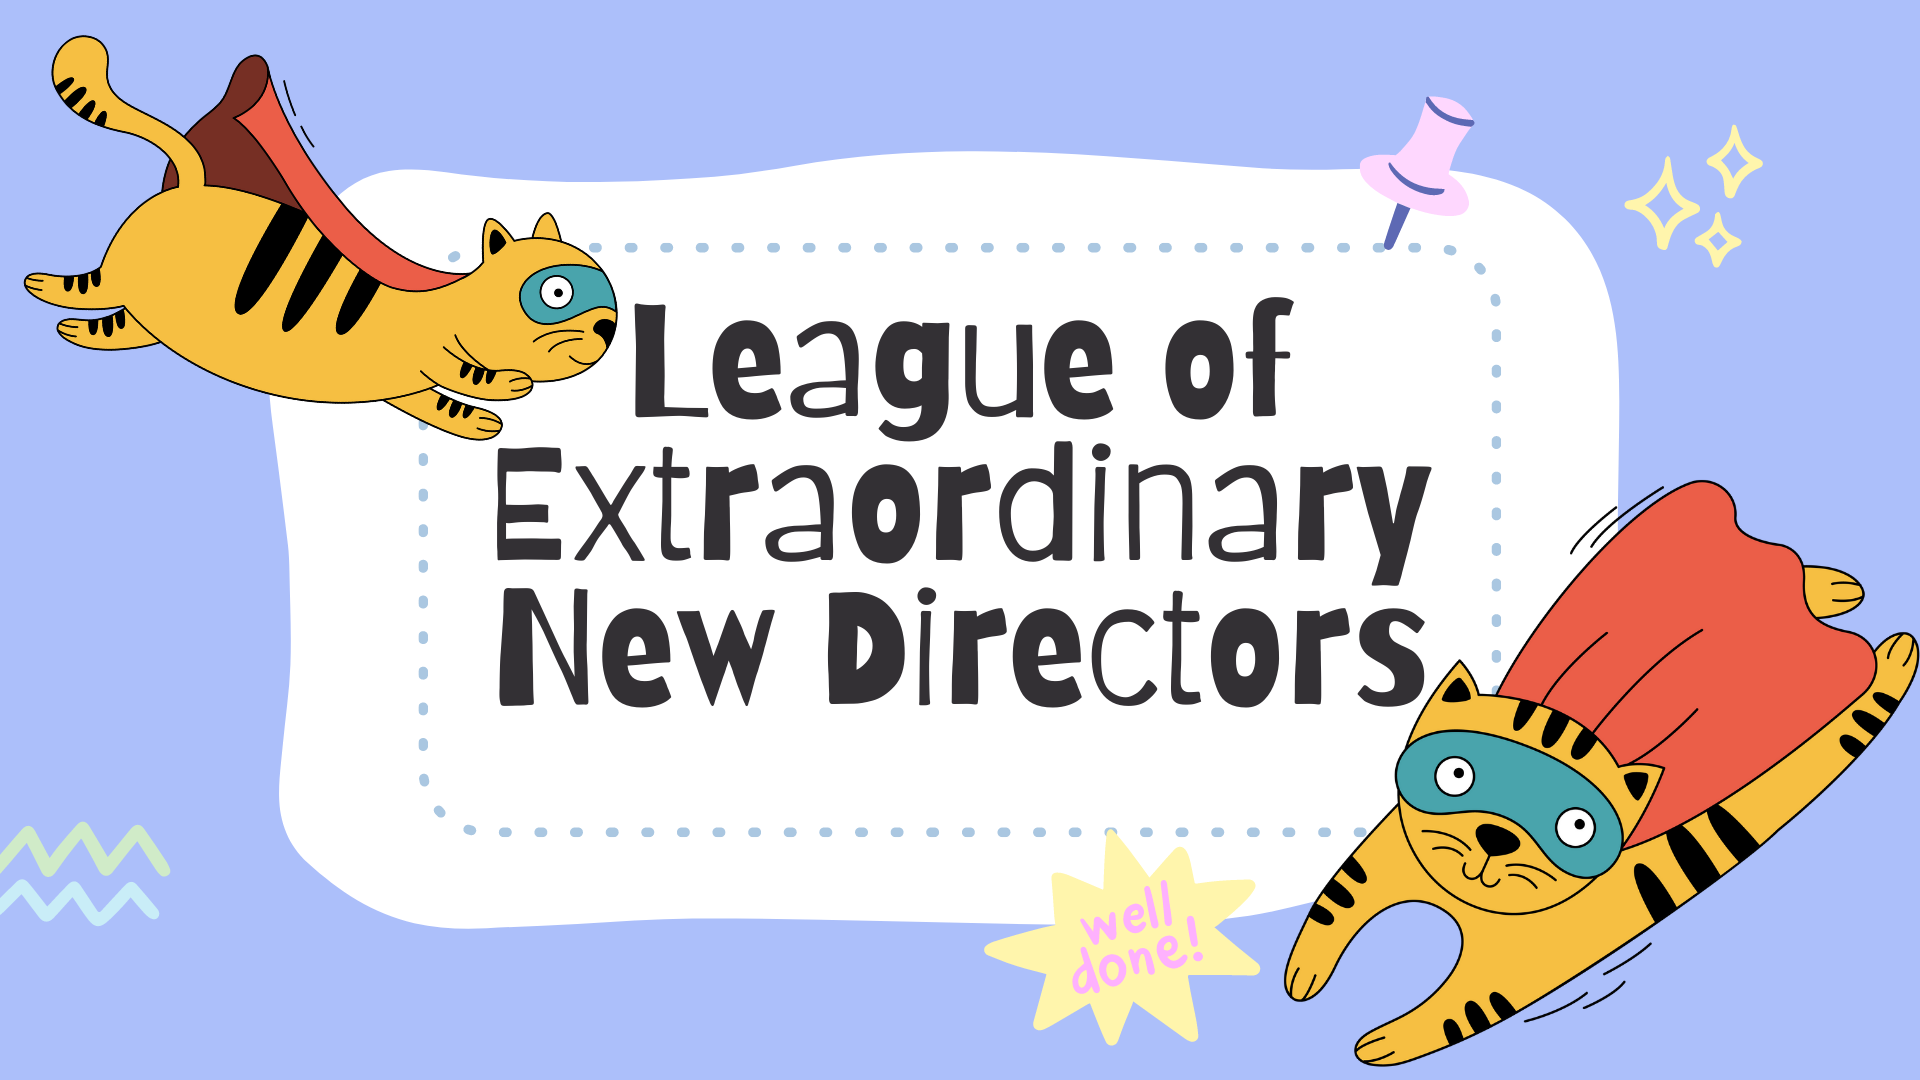 The League of Extraordinary Directors with flying cats in superhero capes.